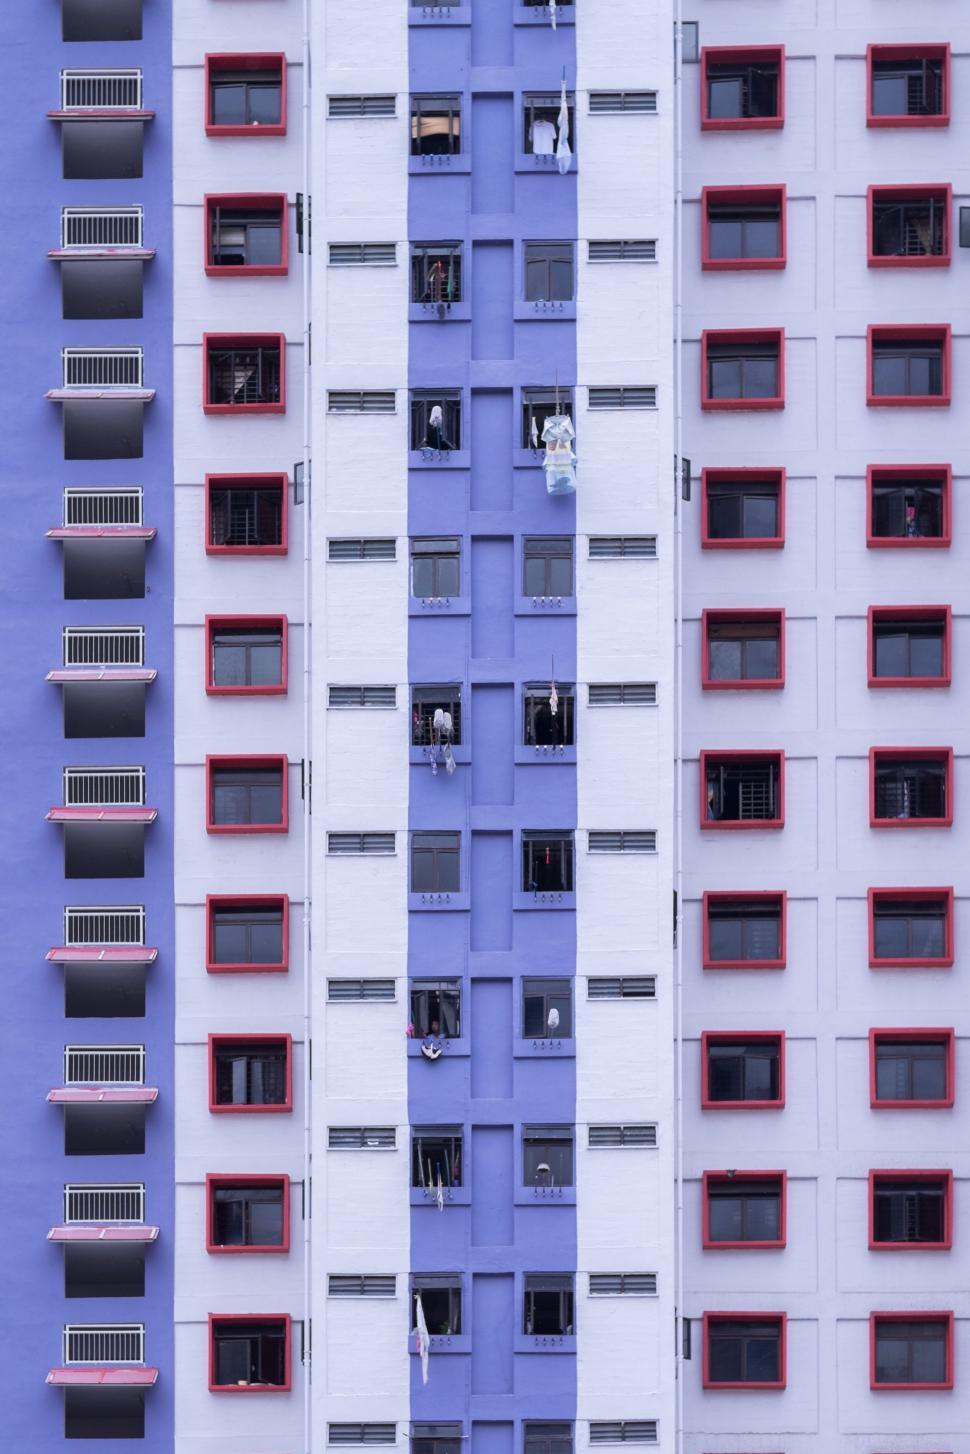 Free Image of Tall White and Blue Building With Lots of Windows 